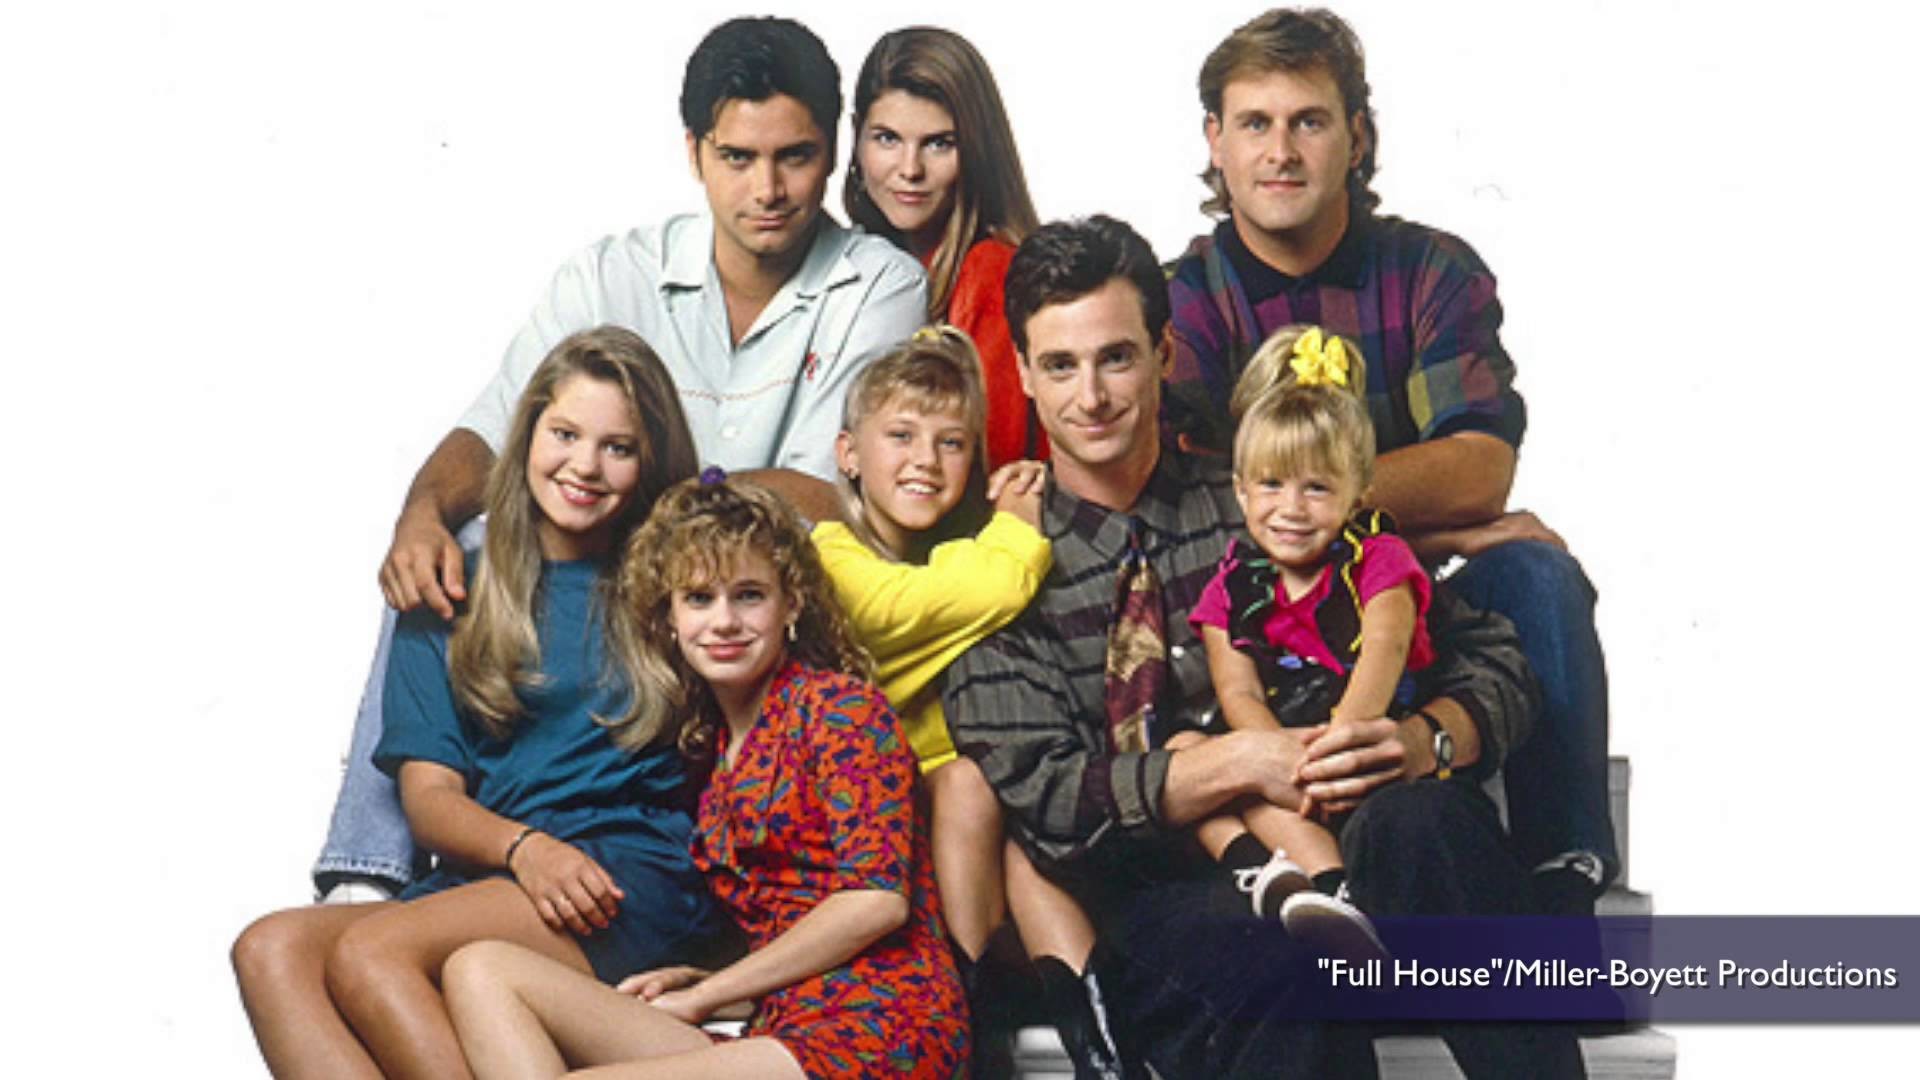 1920x1080 Full House images Full House Cast wallpaper and background photos .